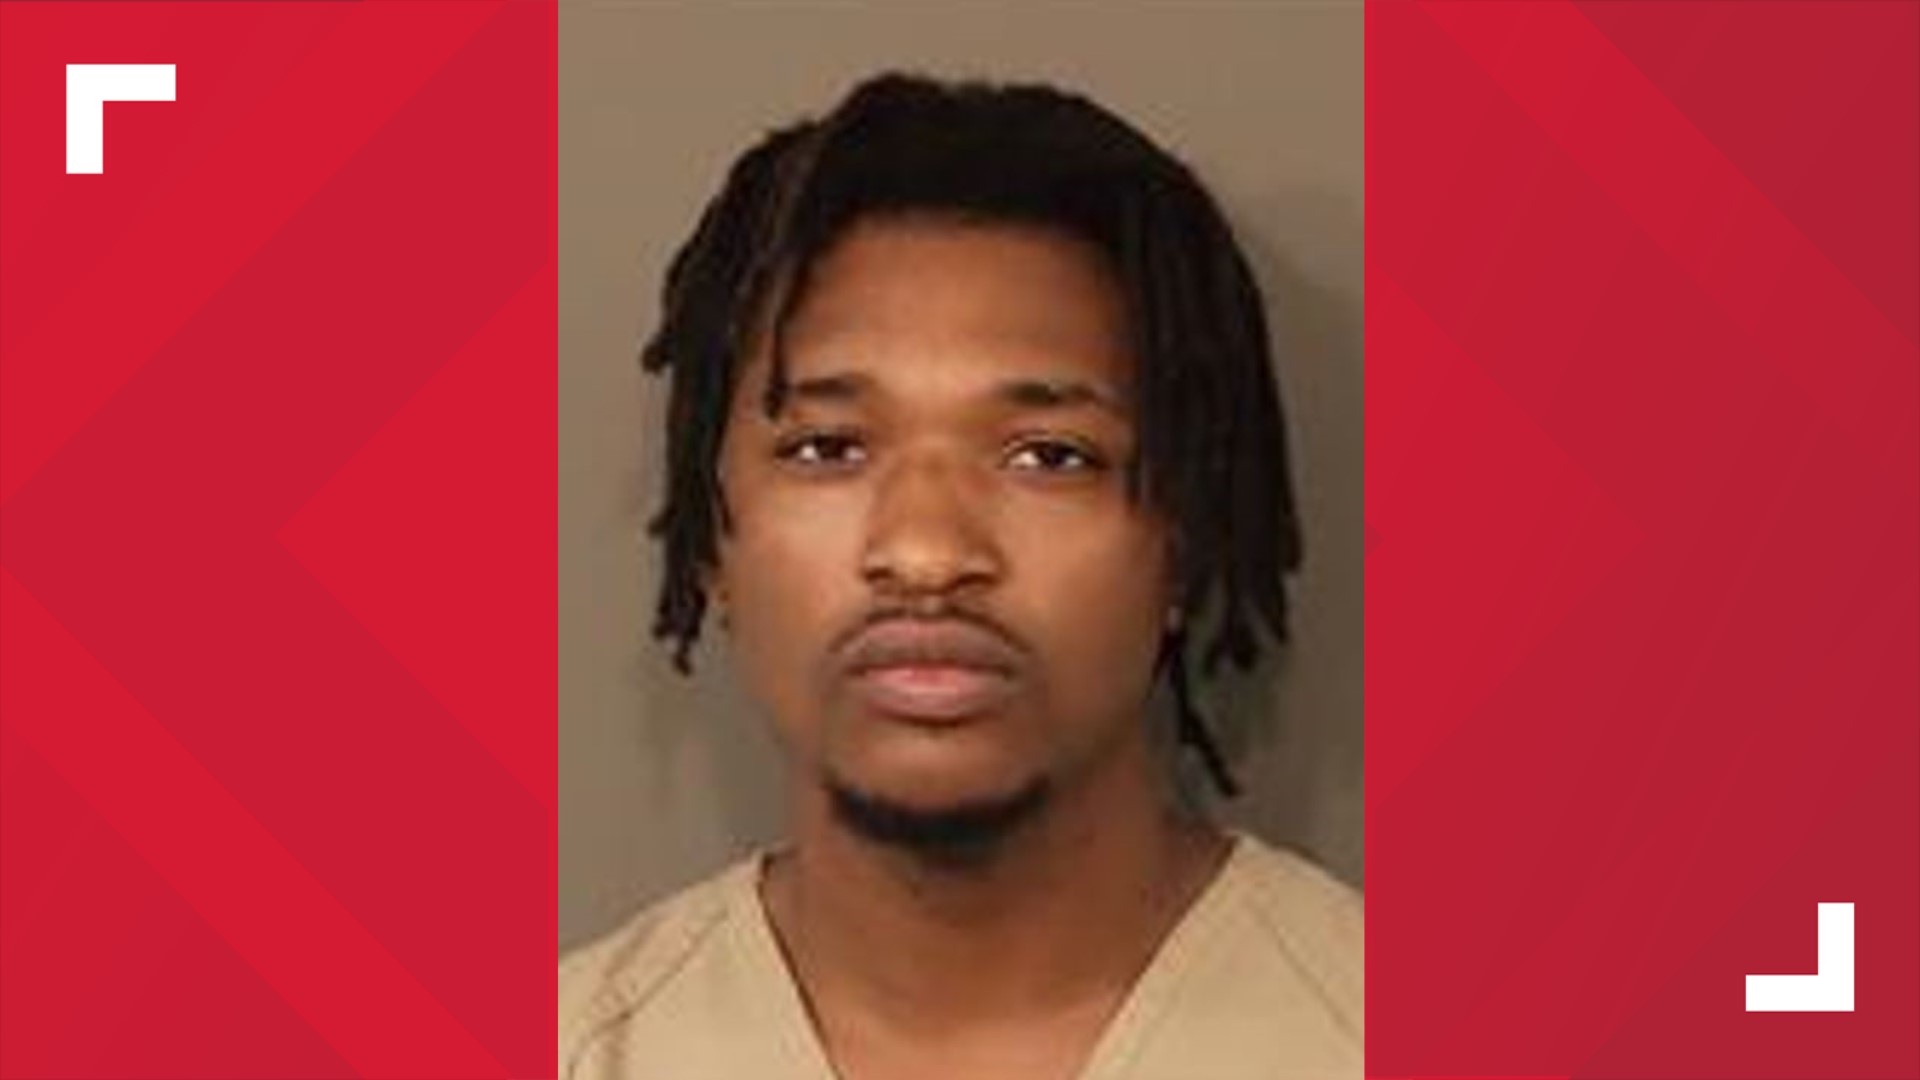 Robert Rogers Jr., 24, is charged with felonious assault and tampering with evidence.